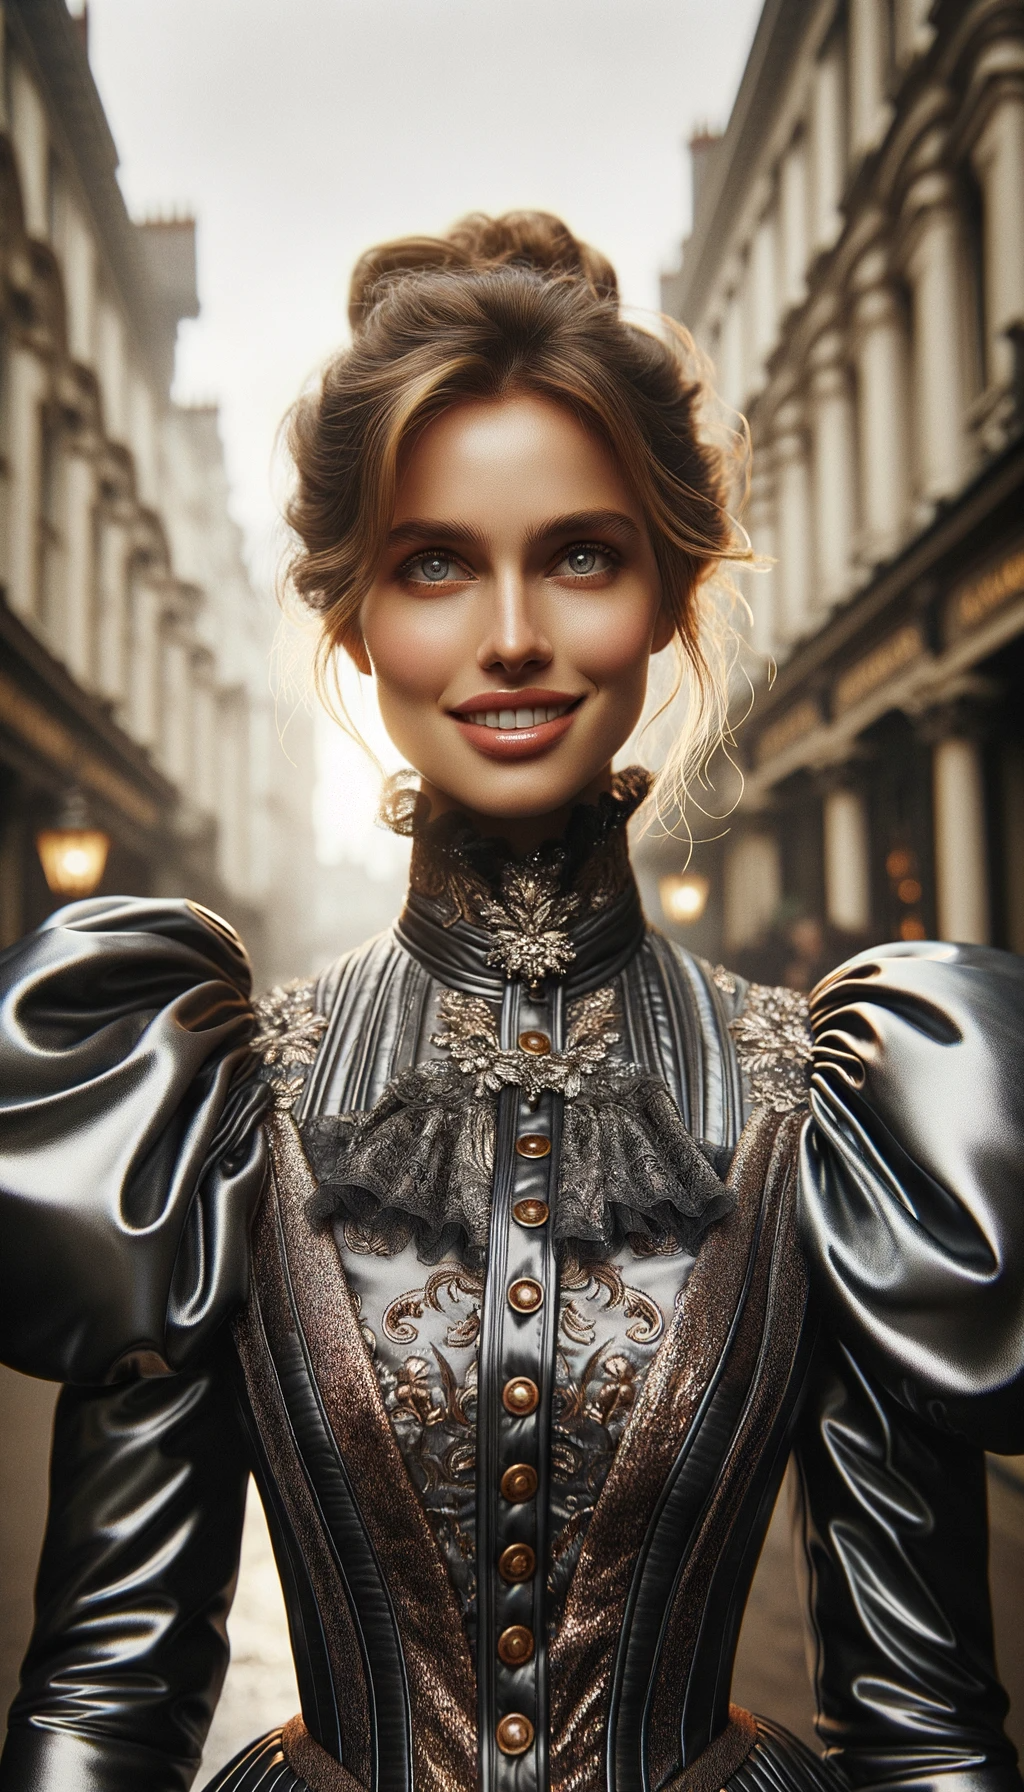 Edwardian Steampunk: Whispers of Steam and Satin